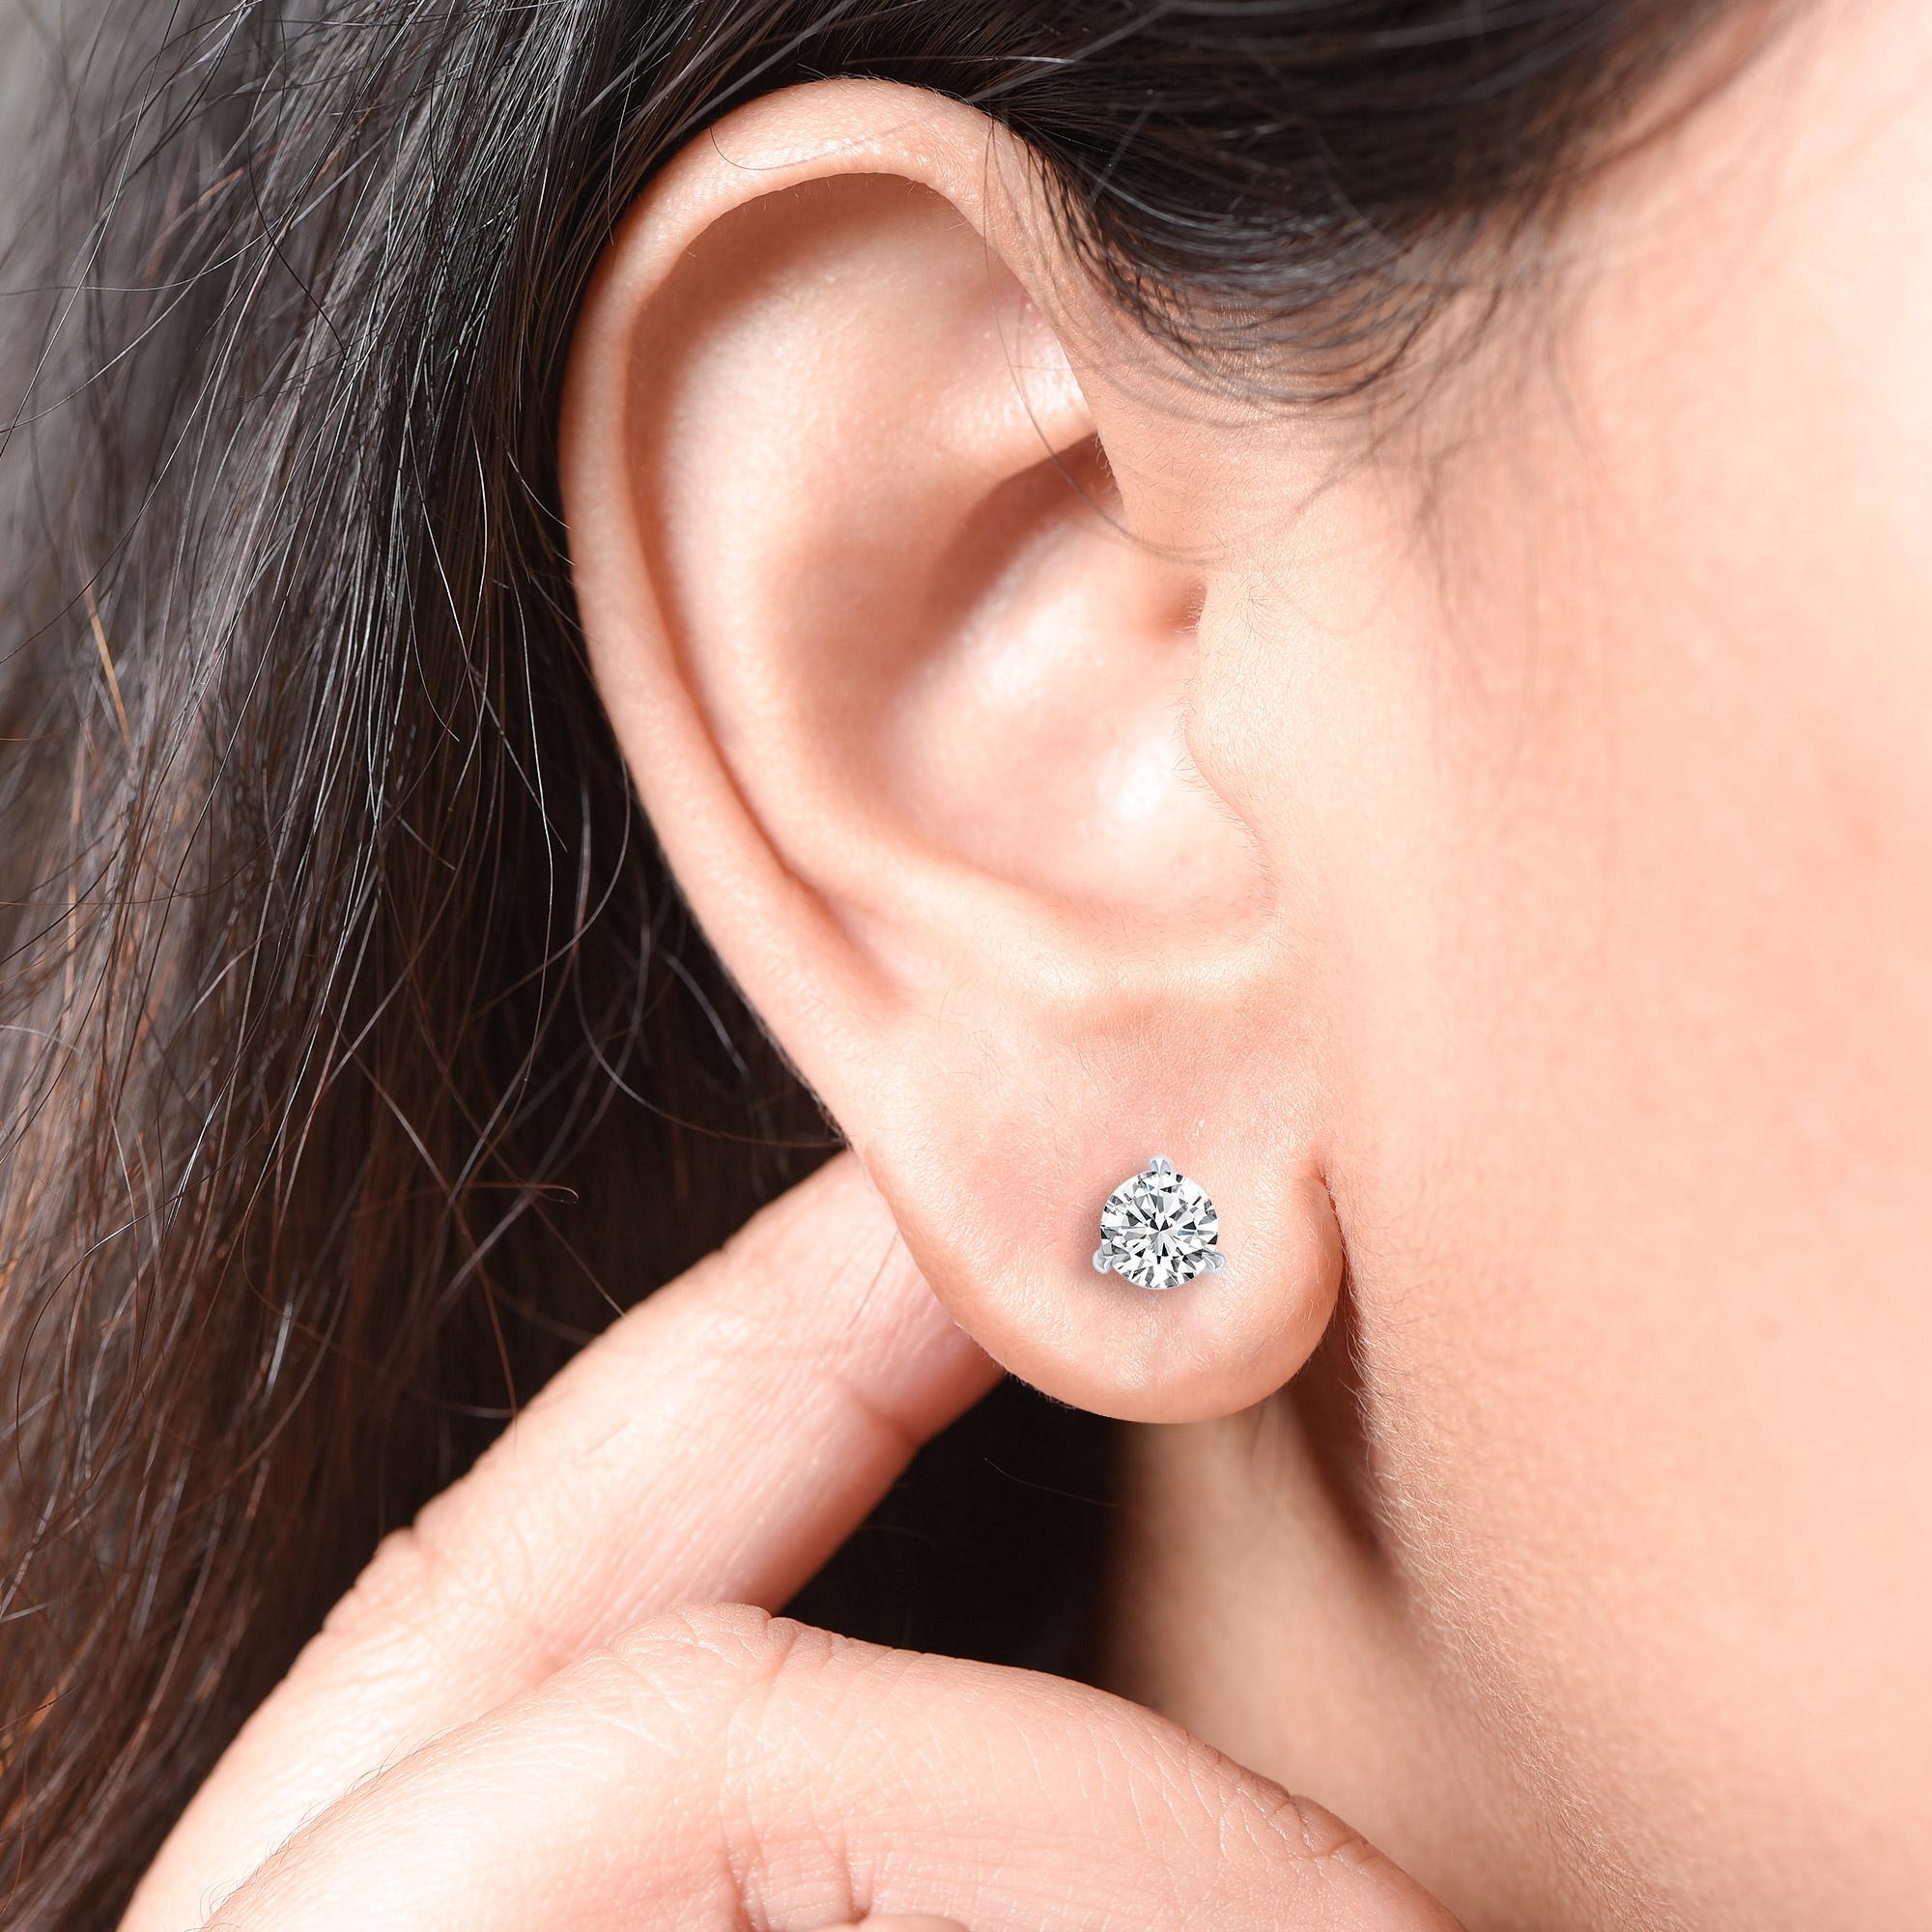 These GIA certified classic diamond studs showcase a pair of perfectly matched diamonds weighing total 1.00 carat. Crafted in 18-karat white gold, these three prong earrings are available in yellow and rose gold as well.

Perfect for gifting and for